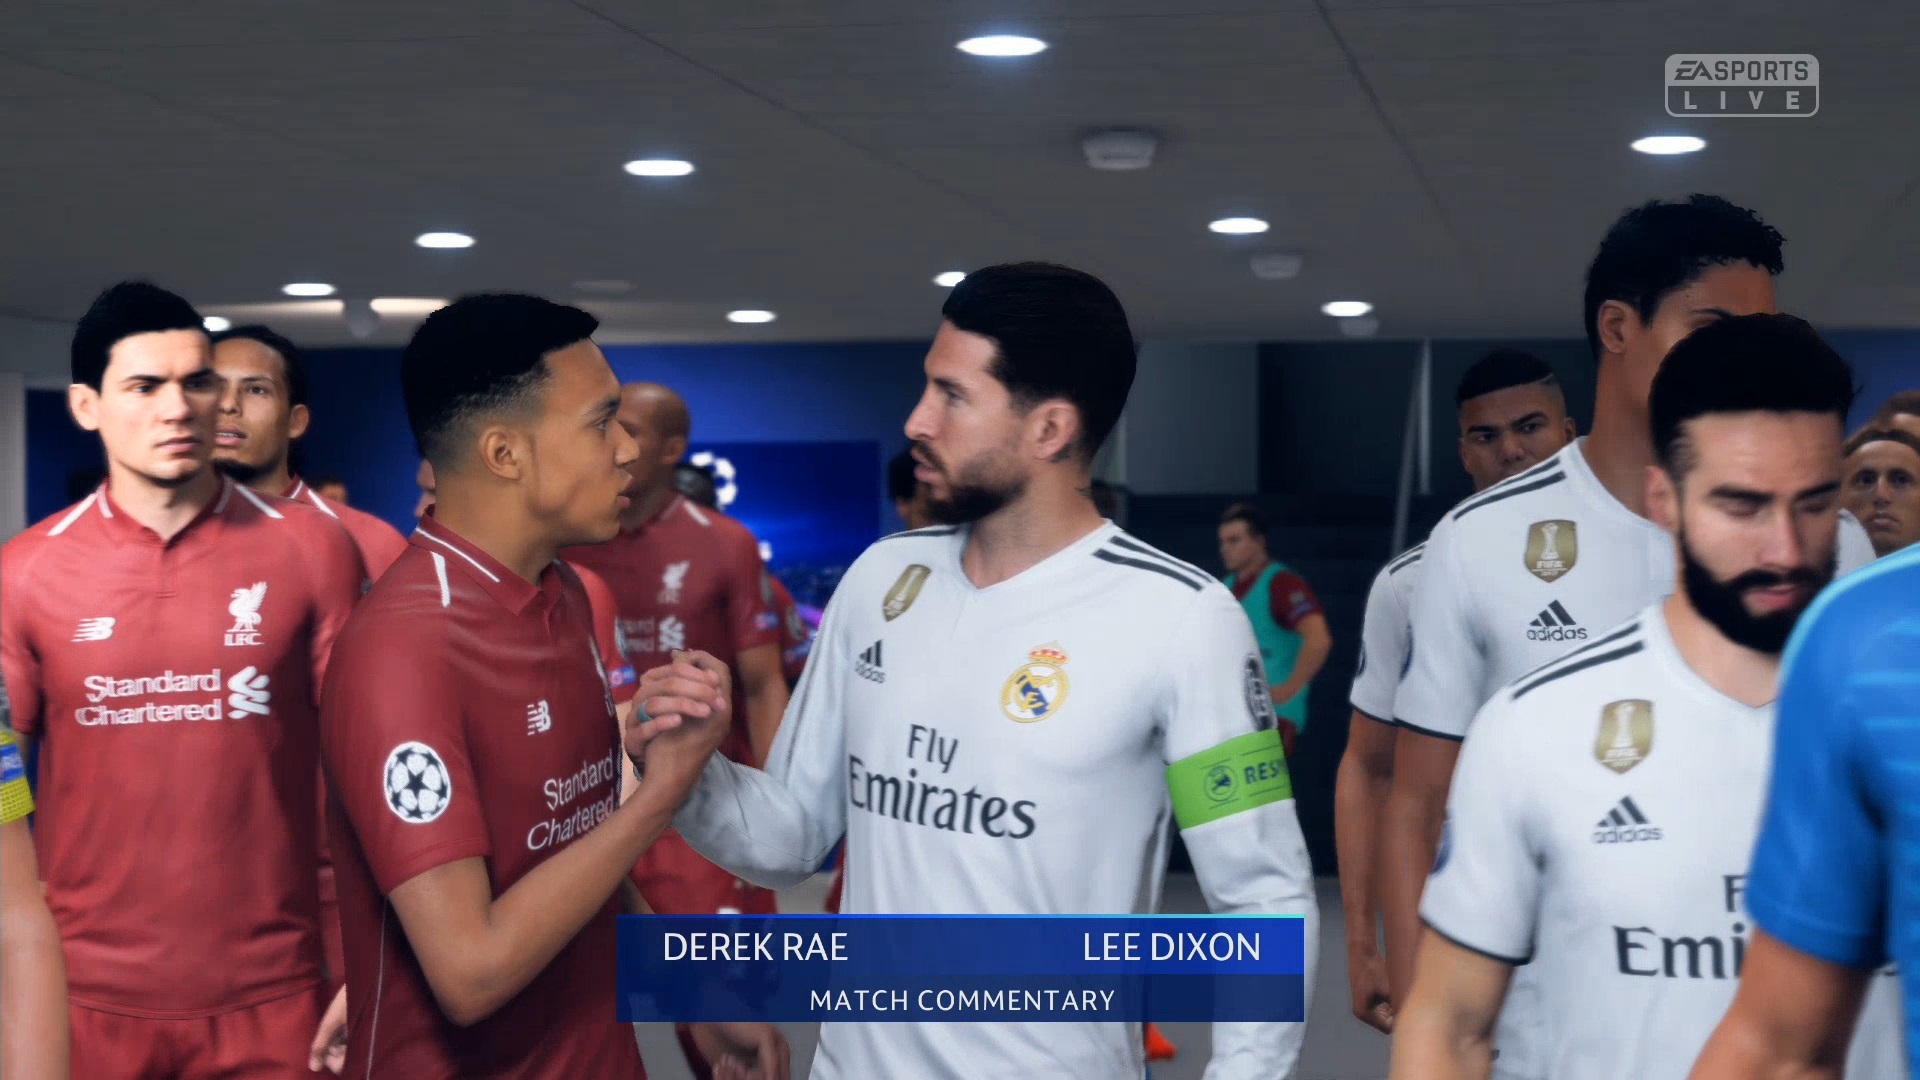 We replayed the Champions League Final in FIFA 19